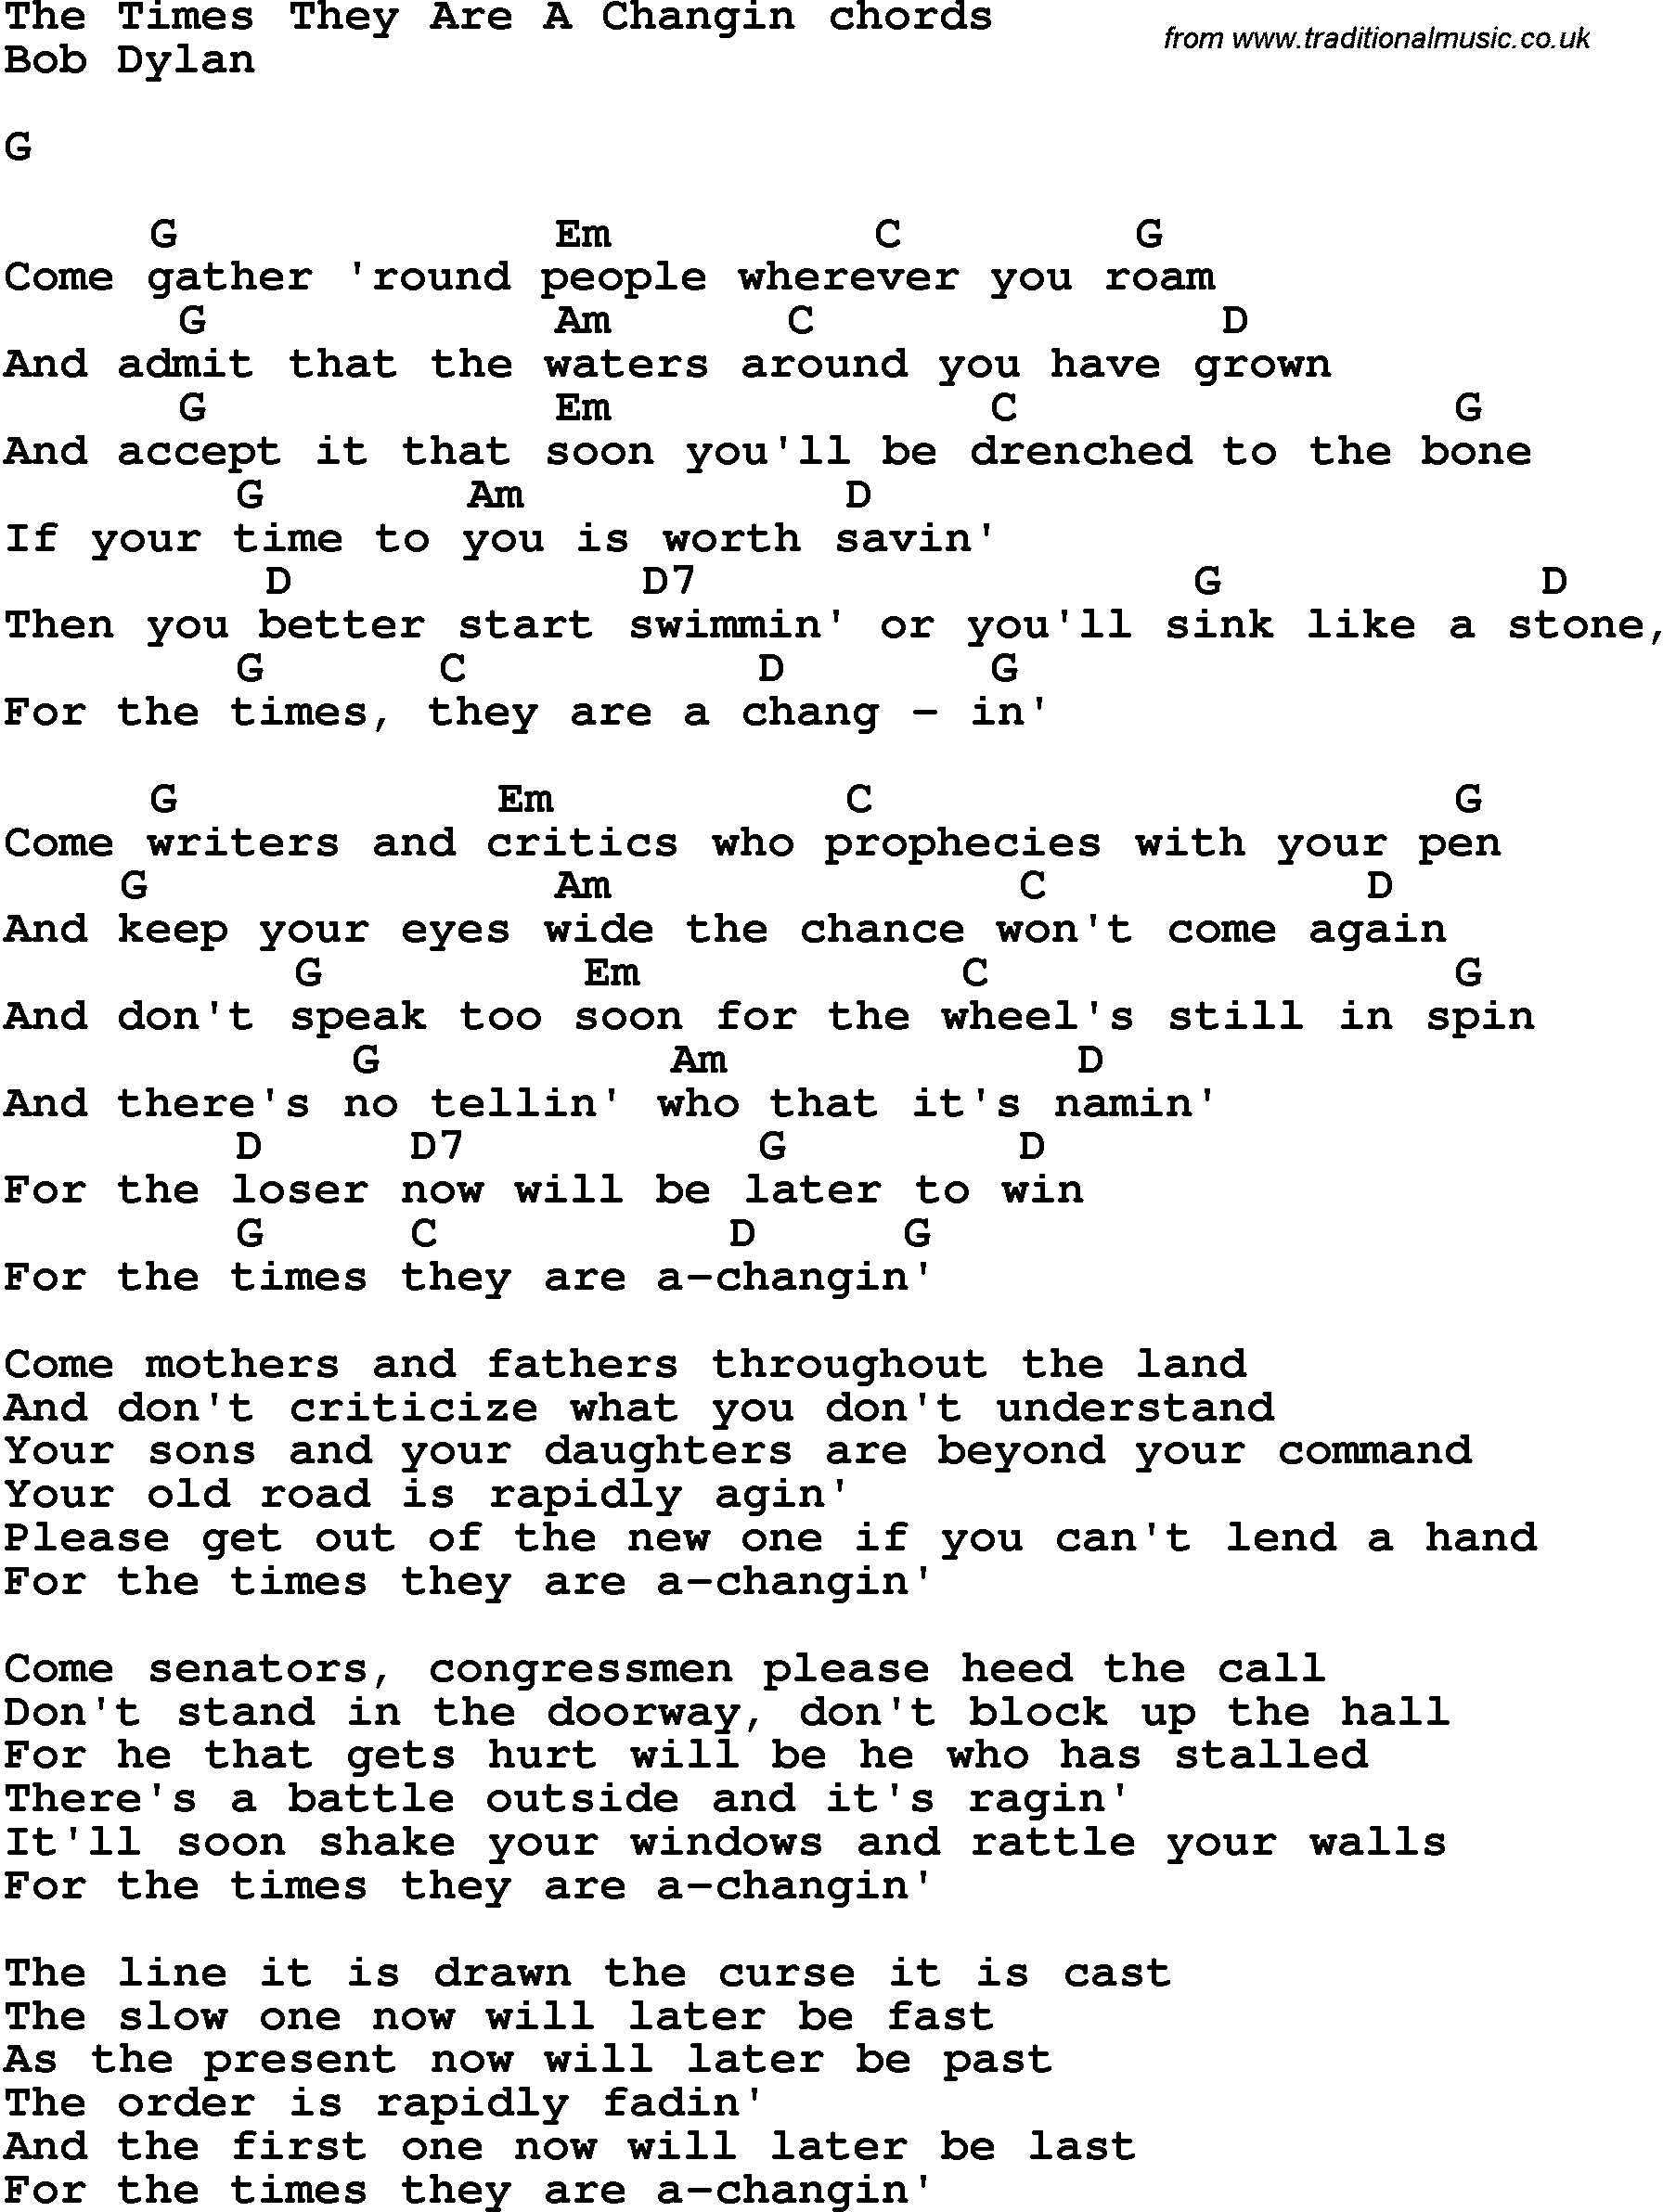 Song Lyrics with guitar chords for The Times They Are A Changin